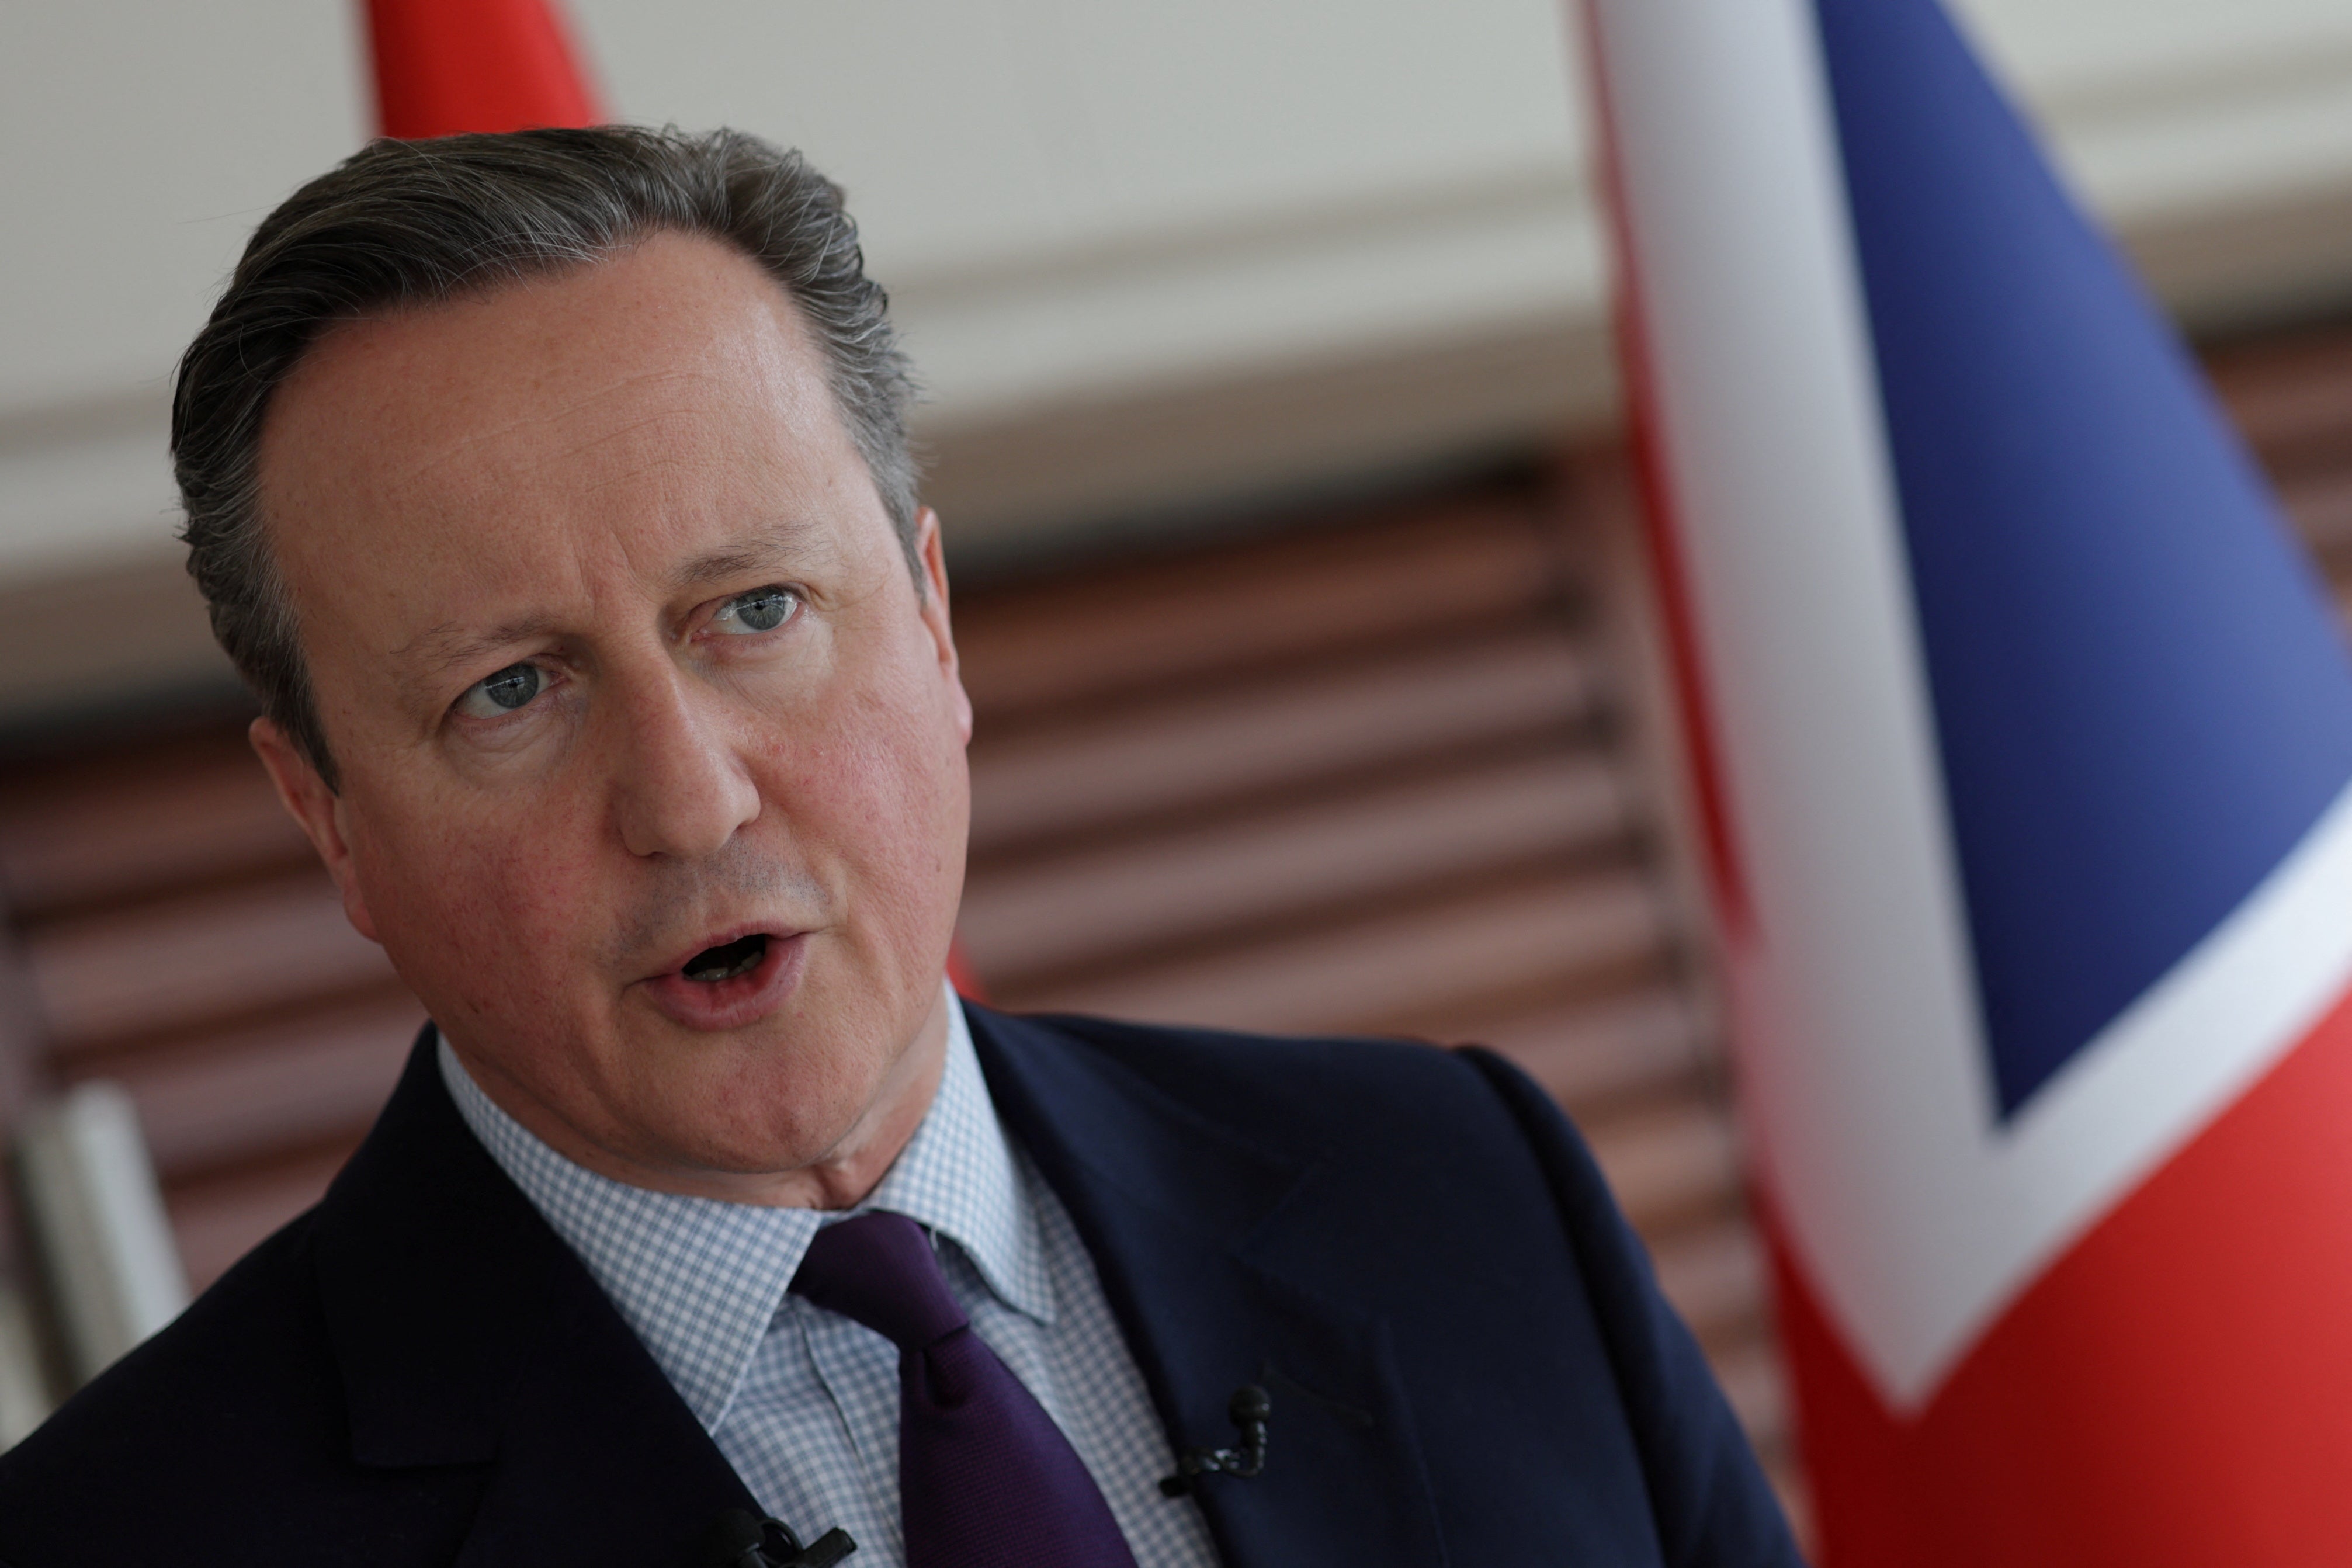 David Cameron sparked a fresh headache for Sunak by suggesting the UK could bring forward formal recognition of Palestine